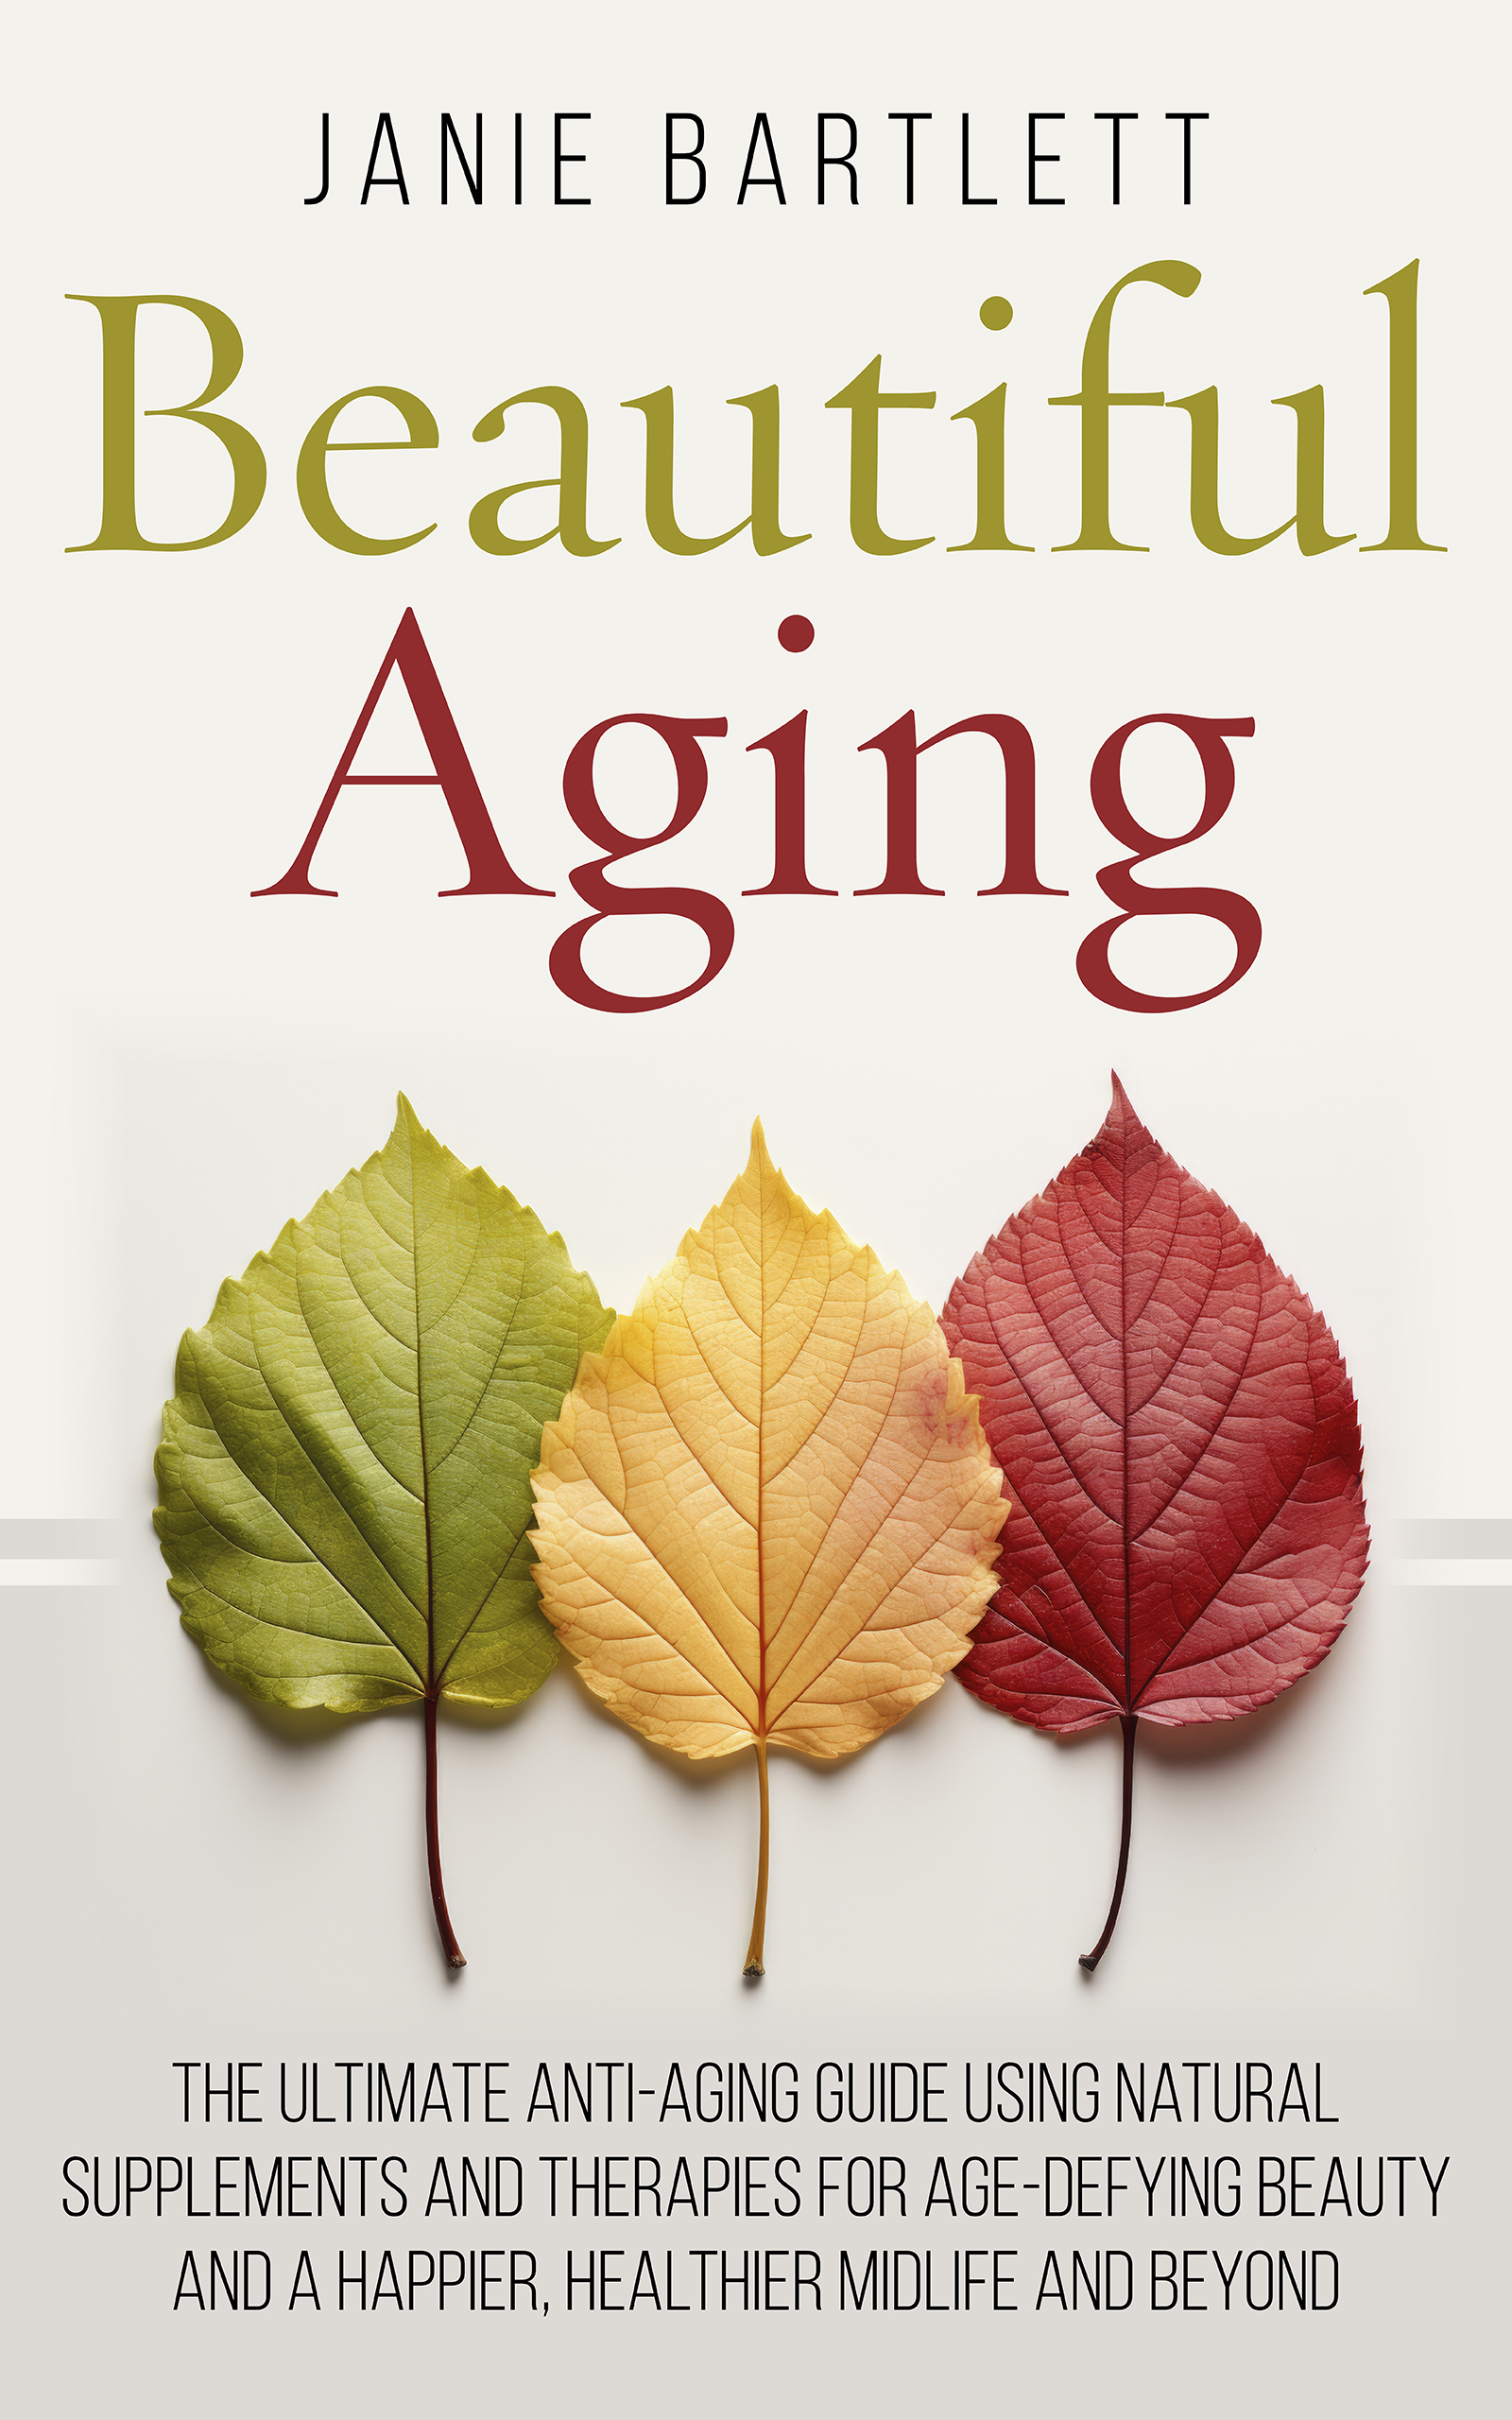 Unlock Ageless Beauty and Wellness: "Beautiful Aging" Reveals the Ultimate Guide for Women Over 50